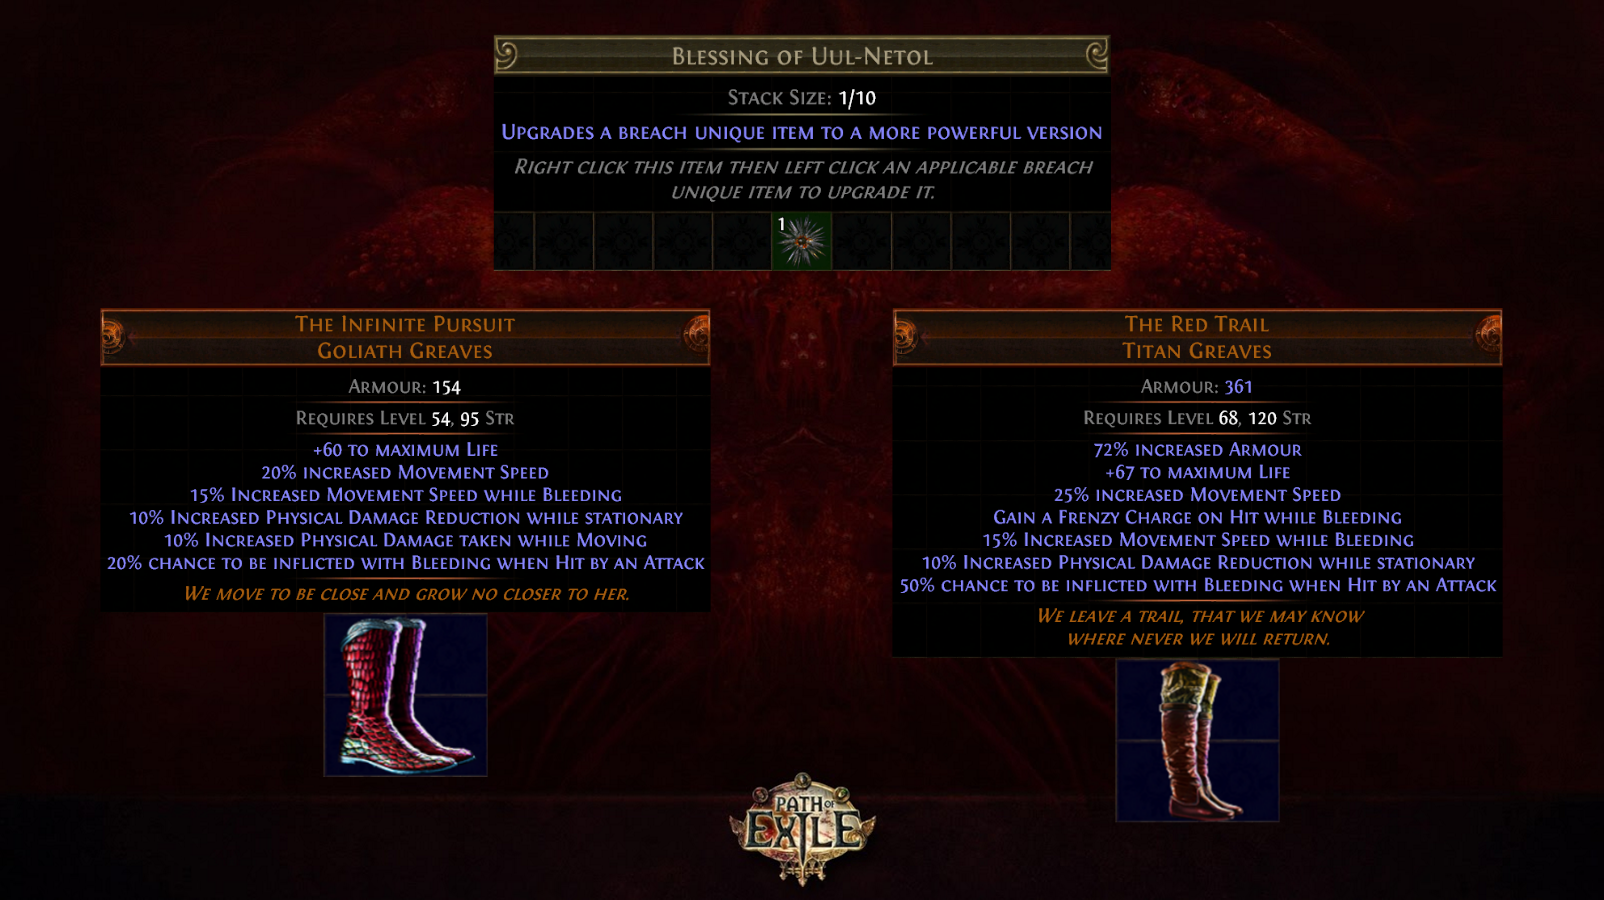 Breach unique items have twists in Path of Exile